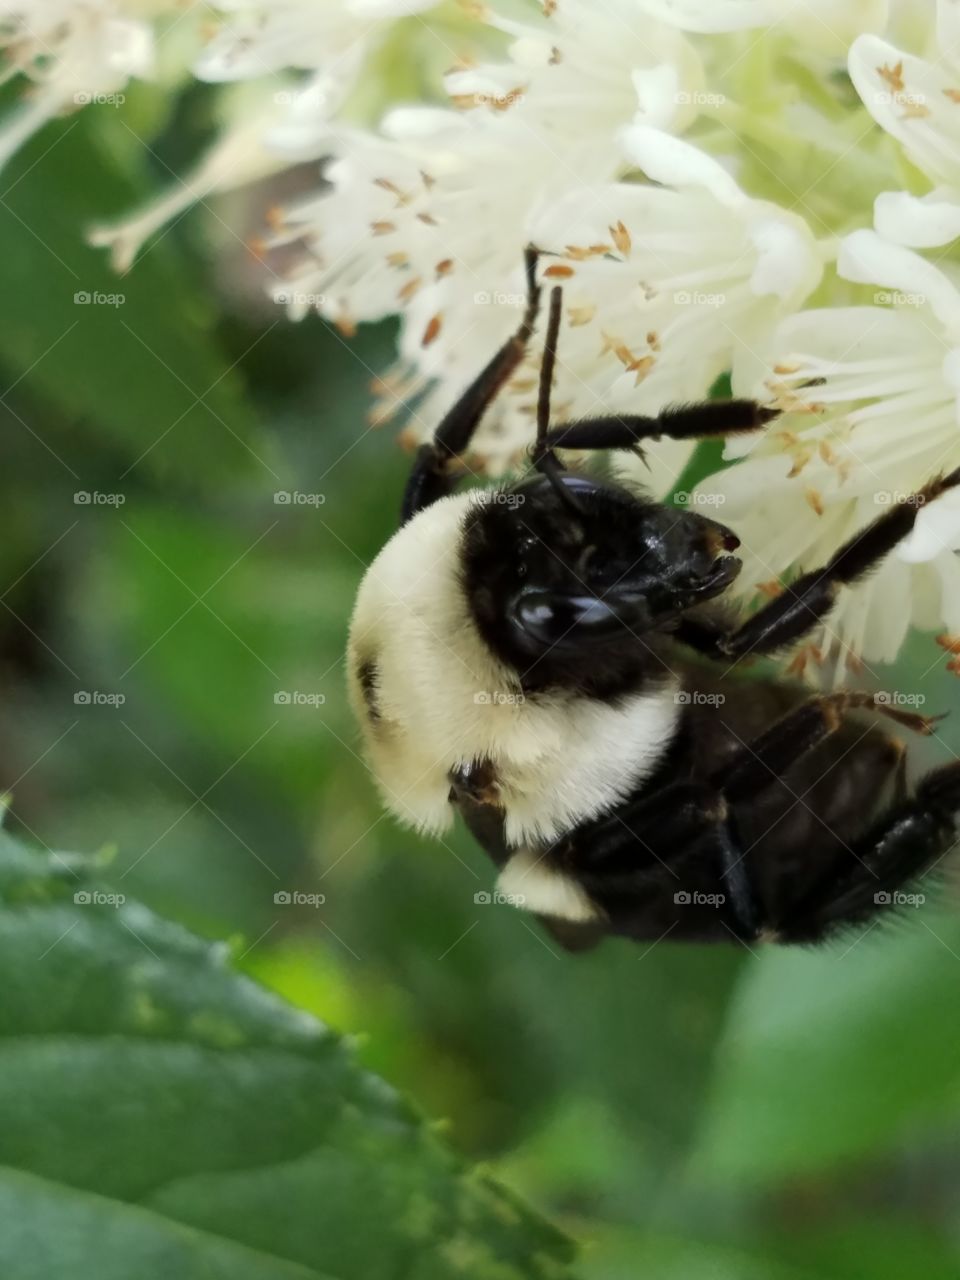 Bumble bee on flowers